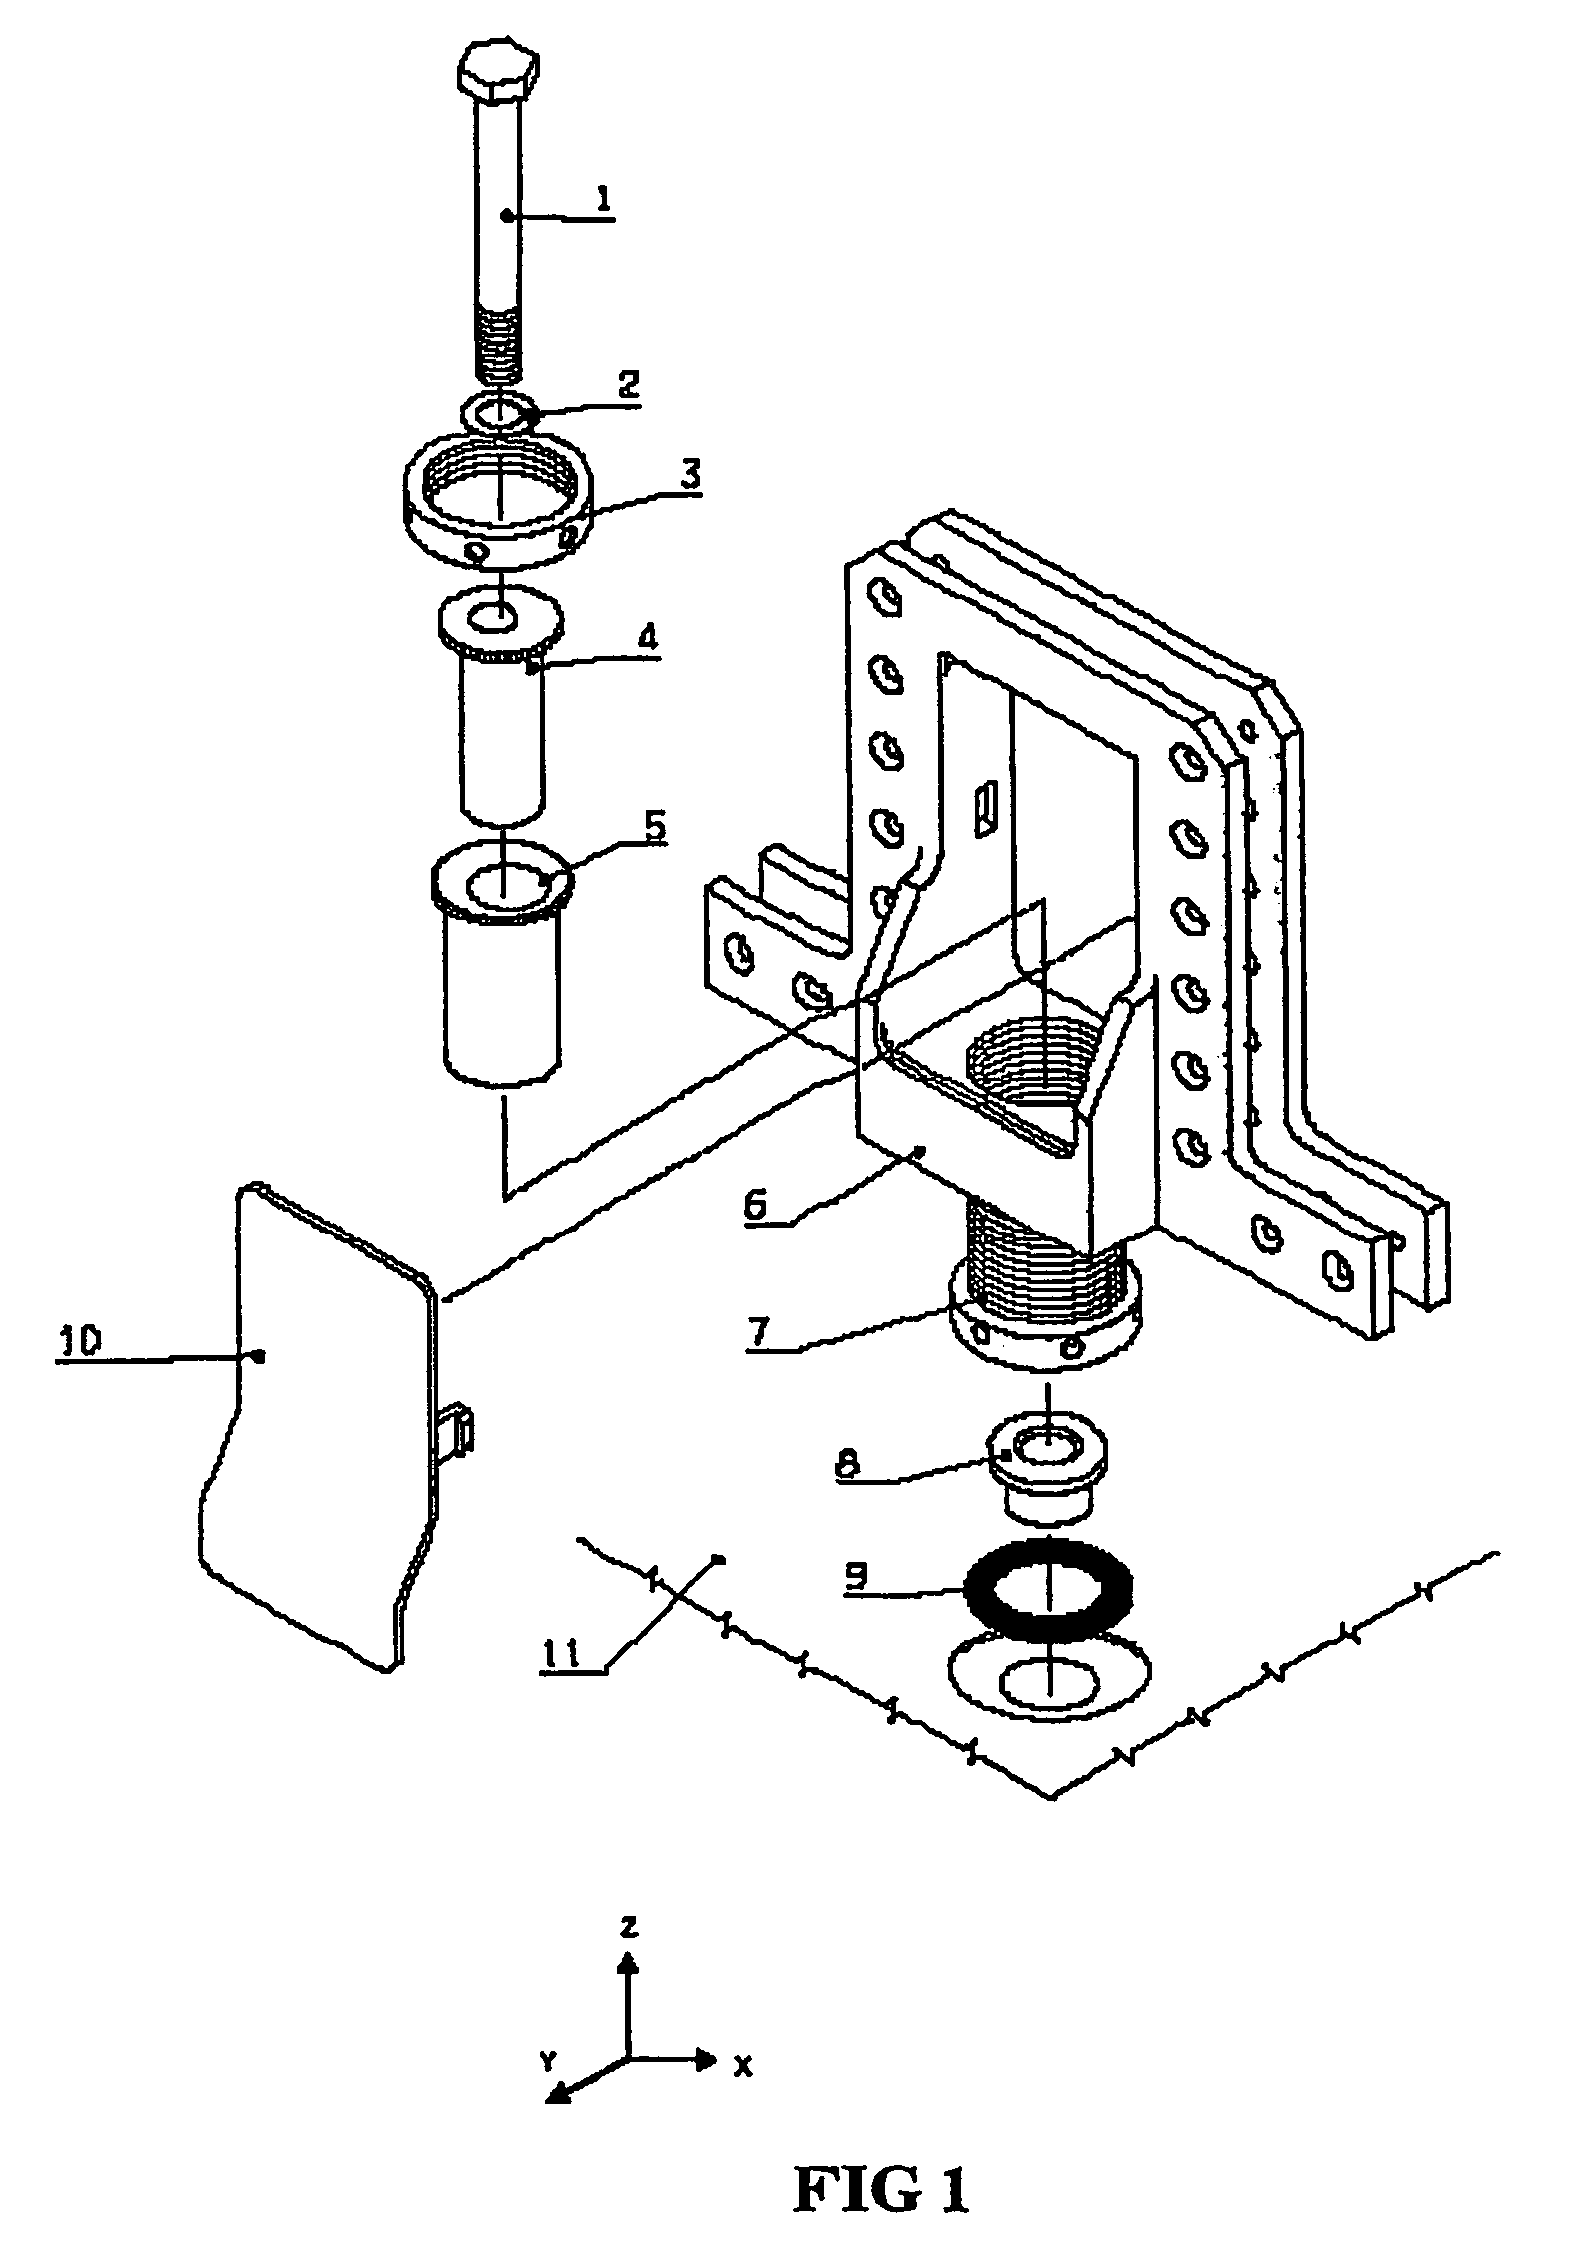 Support device for a galley